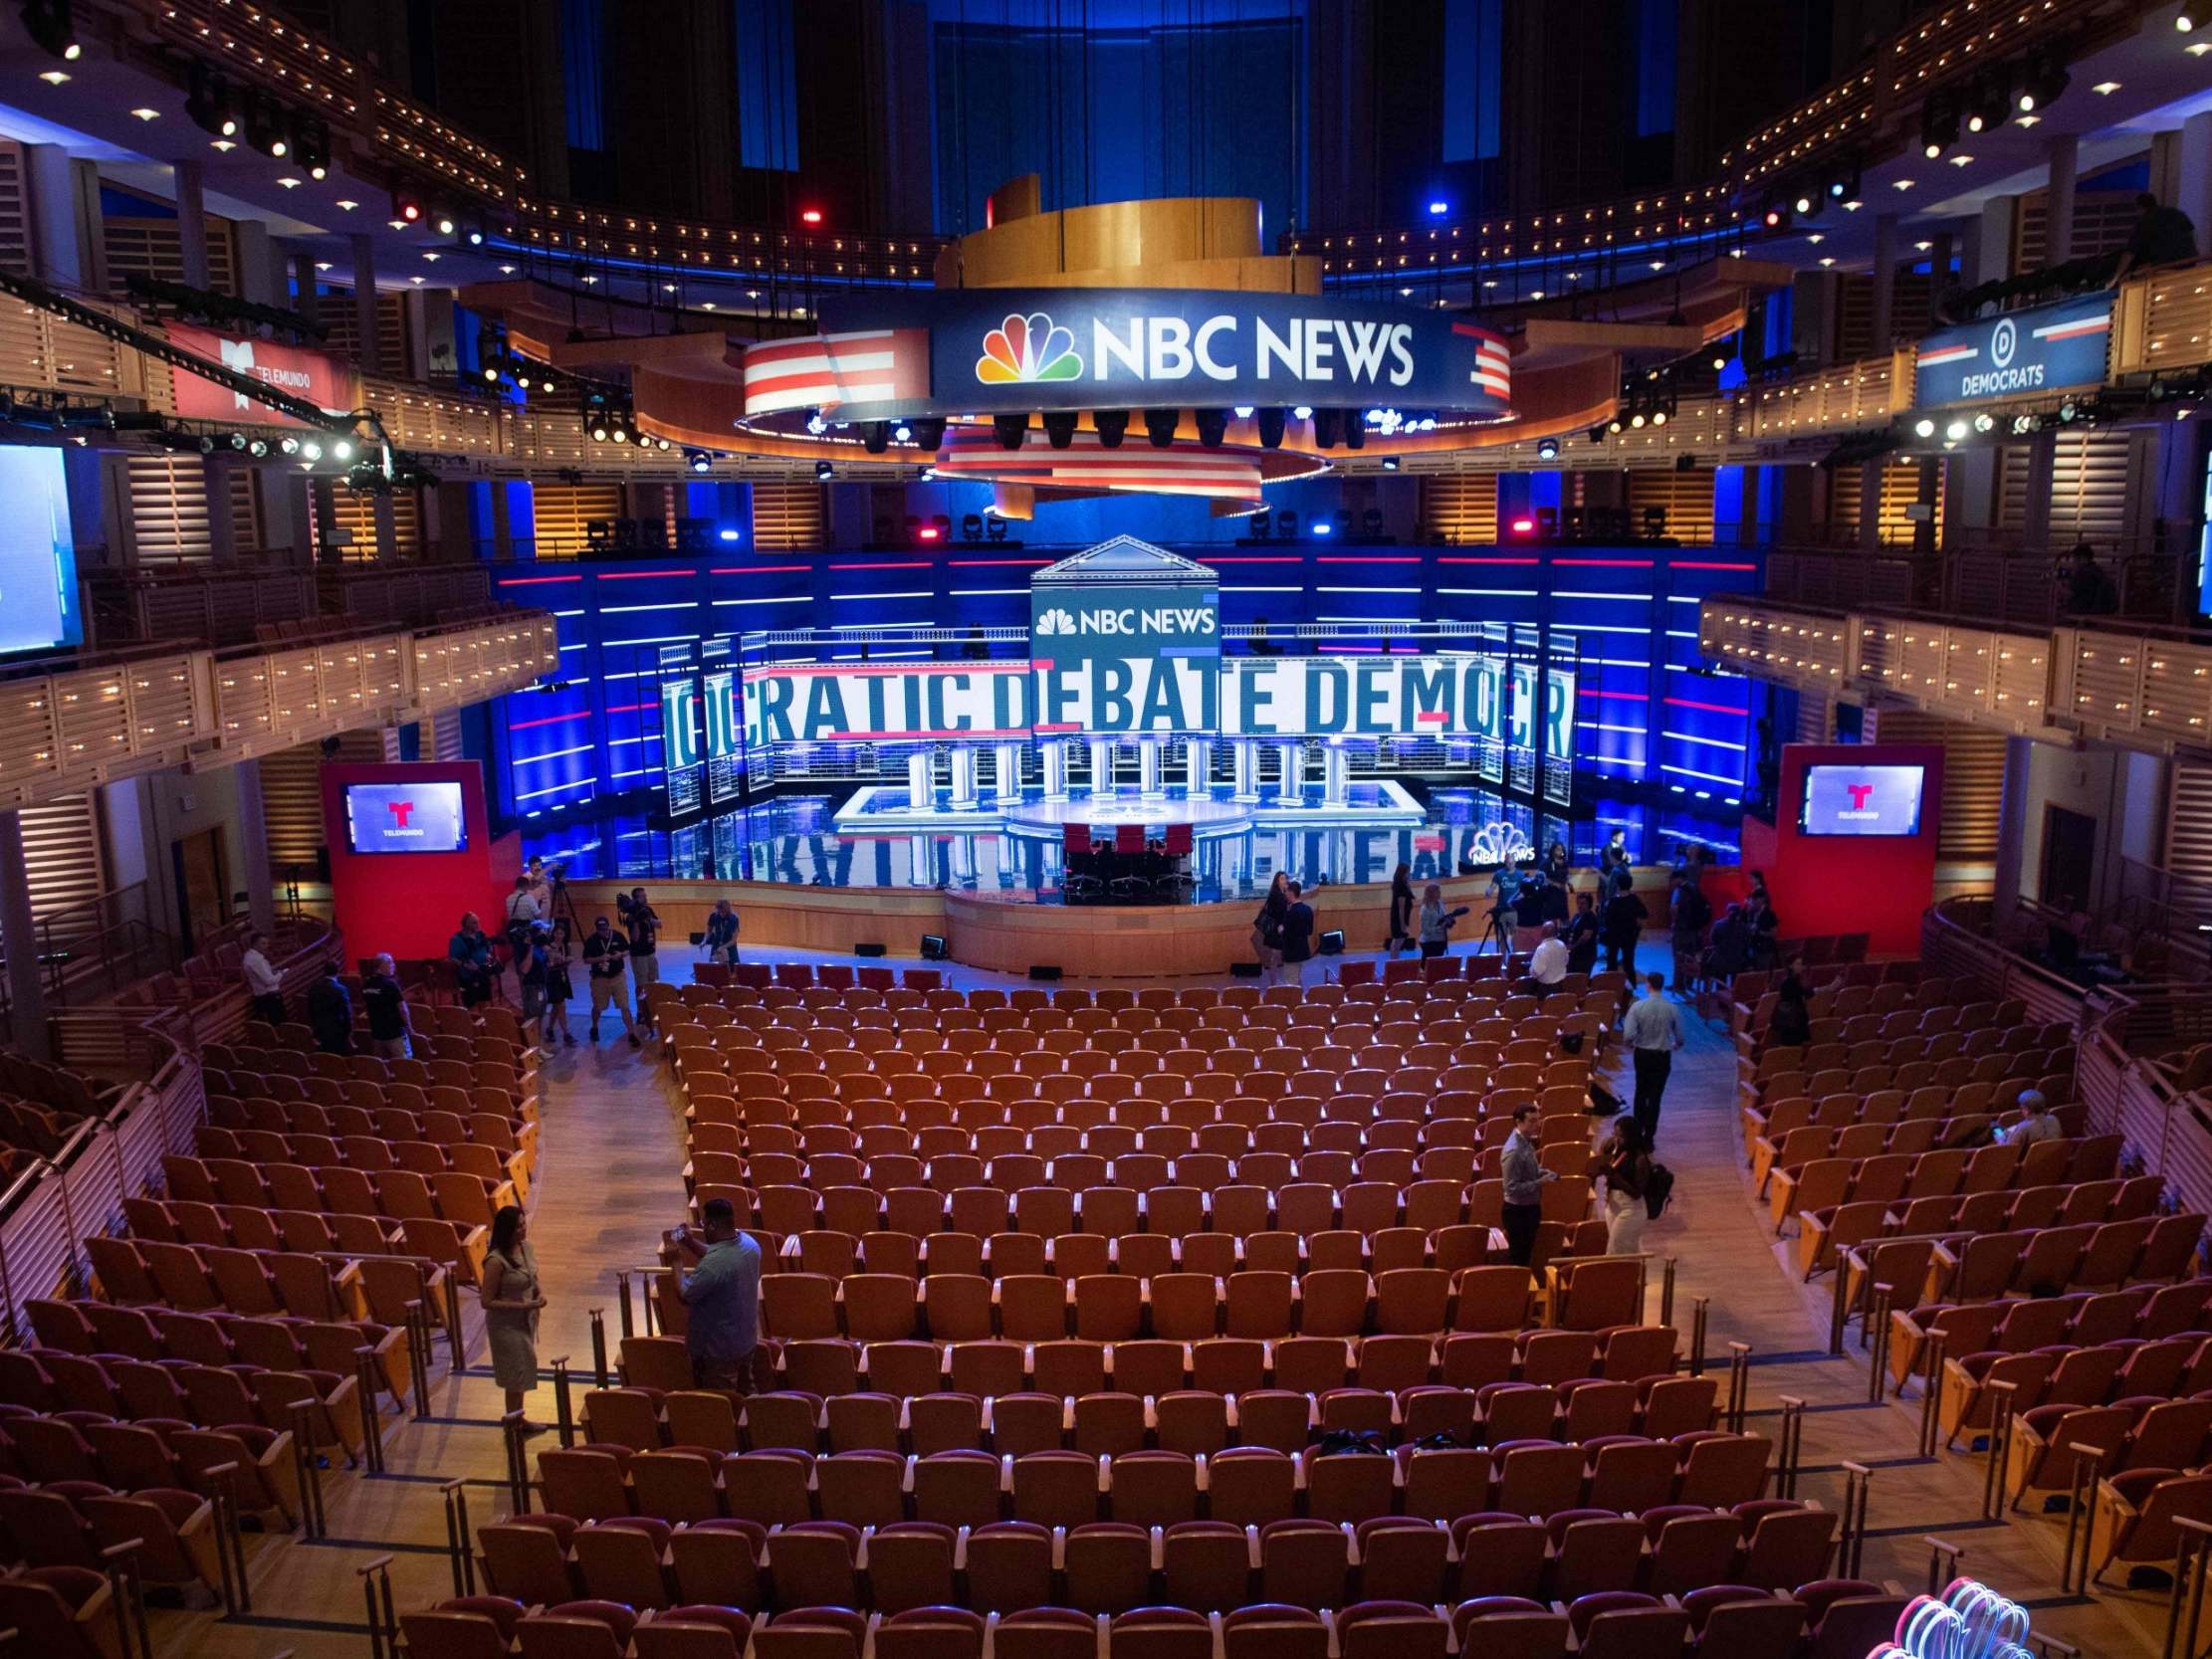 The debate tonight will showcase our best-loved 10 candidates up for president